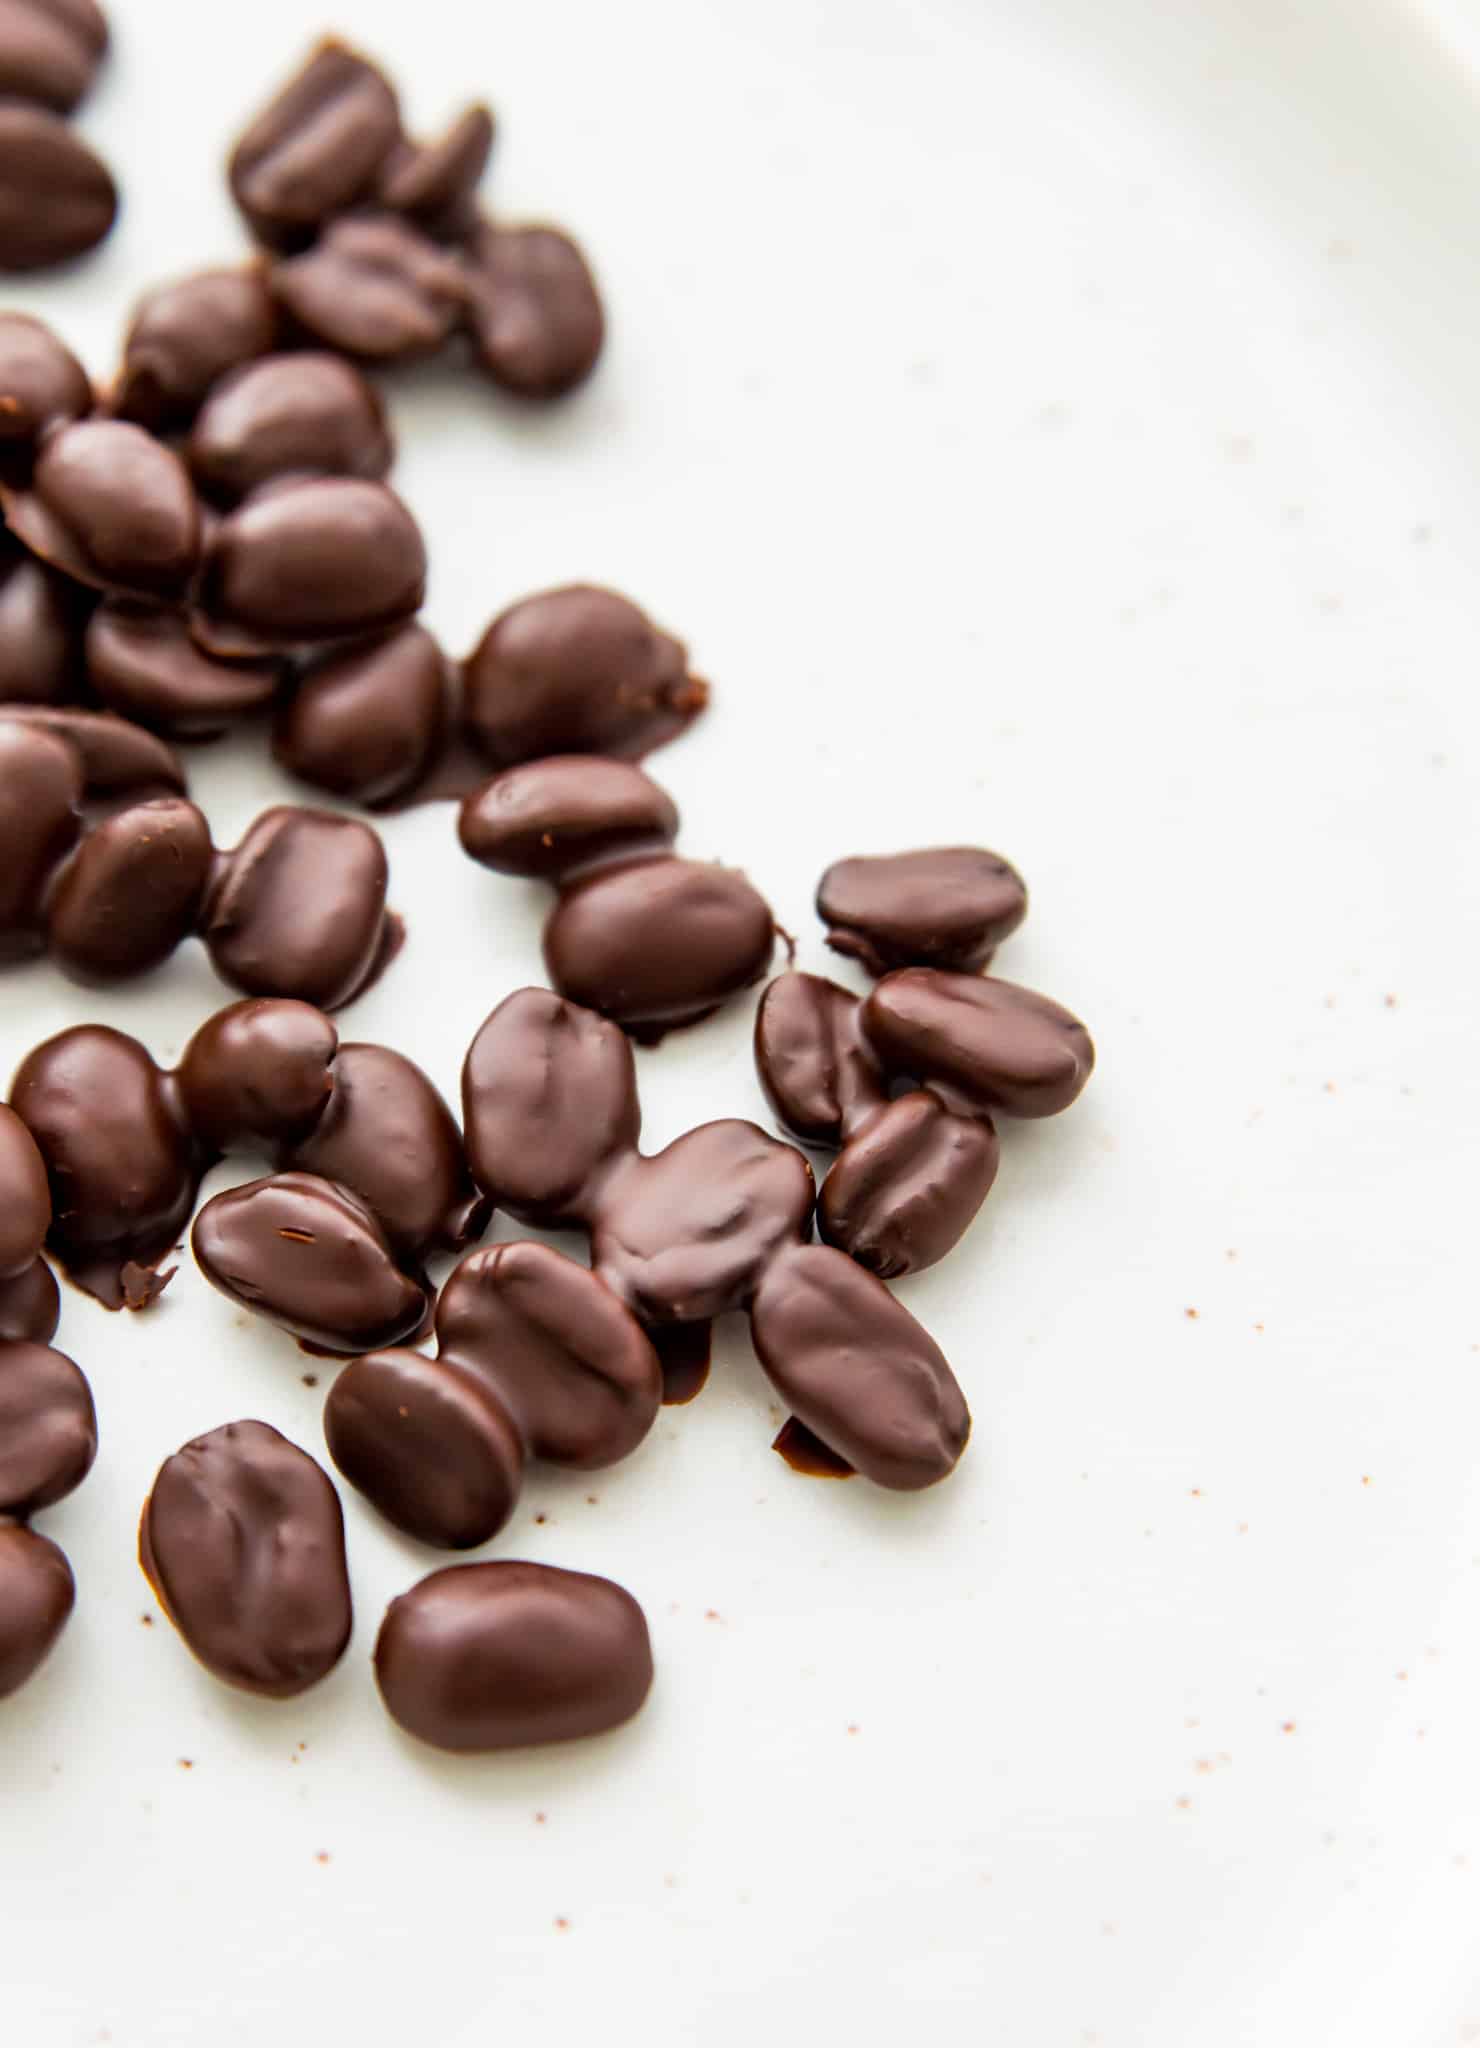 Chocolate Covered Espresso Beans are the perfect afternoon snack when you need a little boost! This 3-ingredient recipe is so simple for the perfect meal prep snacks with a little sweetness and a kick of caffeine. Plus, they're paleo, keto, vegan, and gluten free, too!